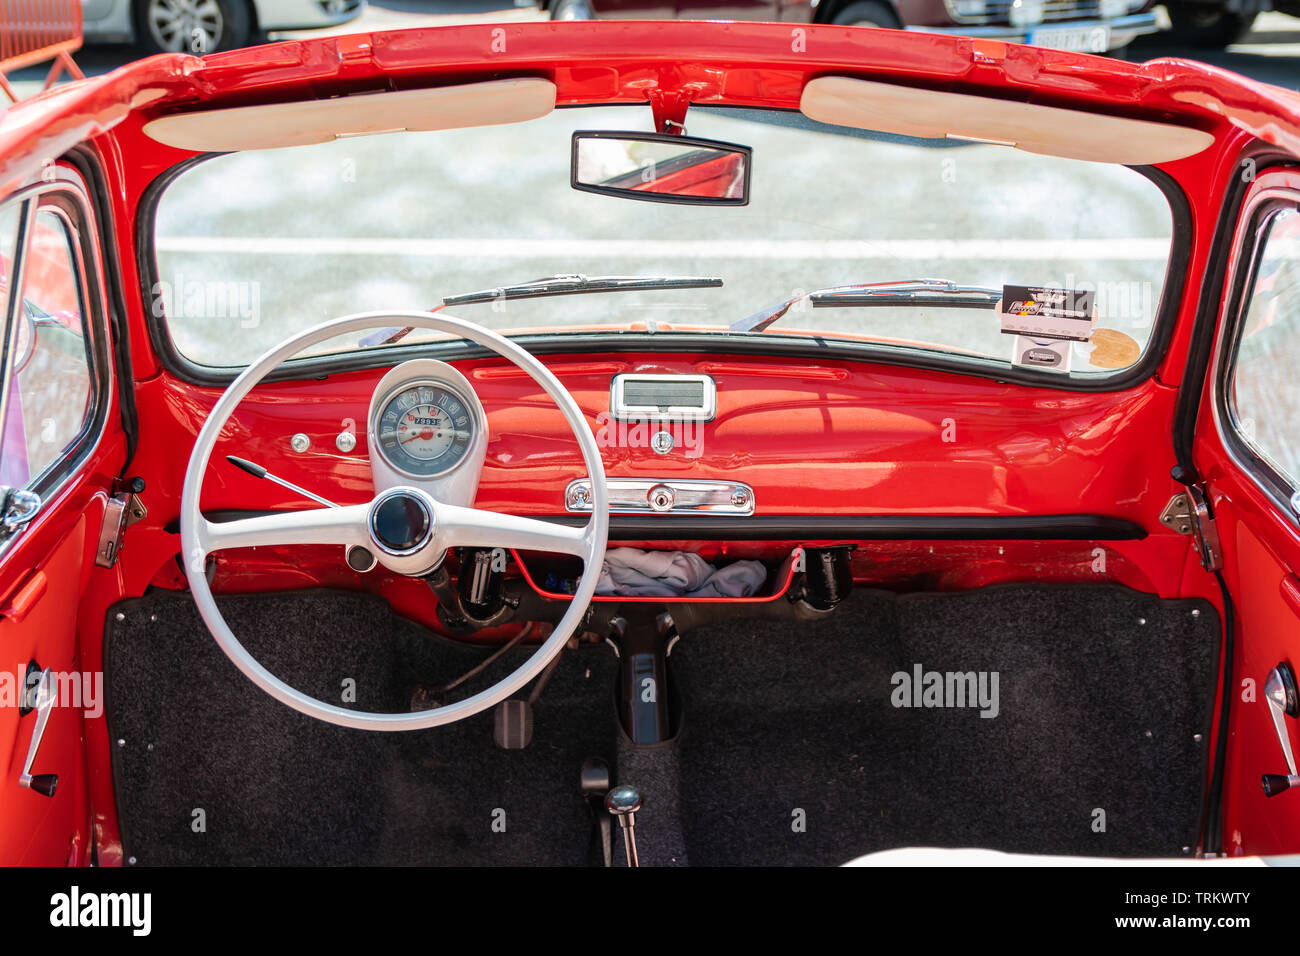 Fiat Steering Wheel High Resolution Stock Photography And Images Alamy